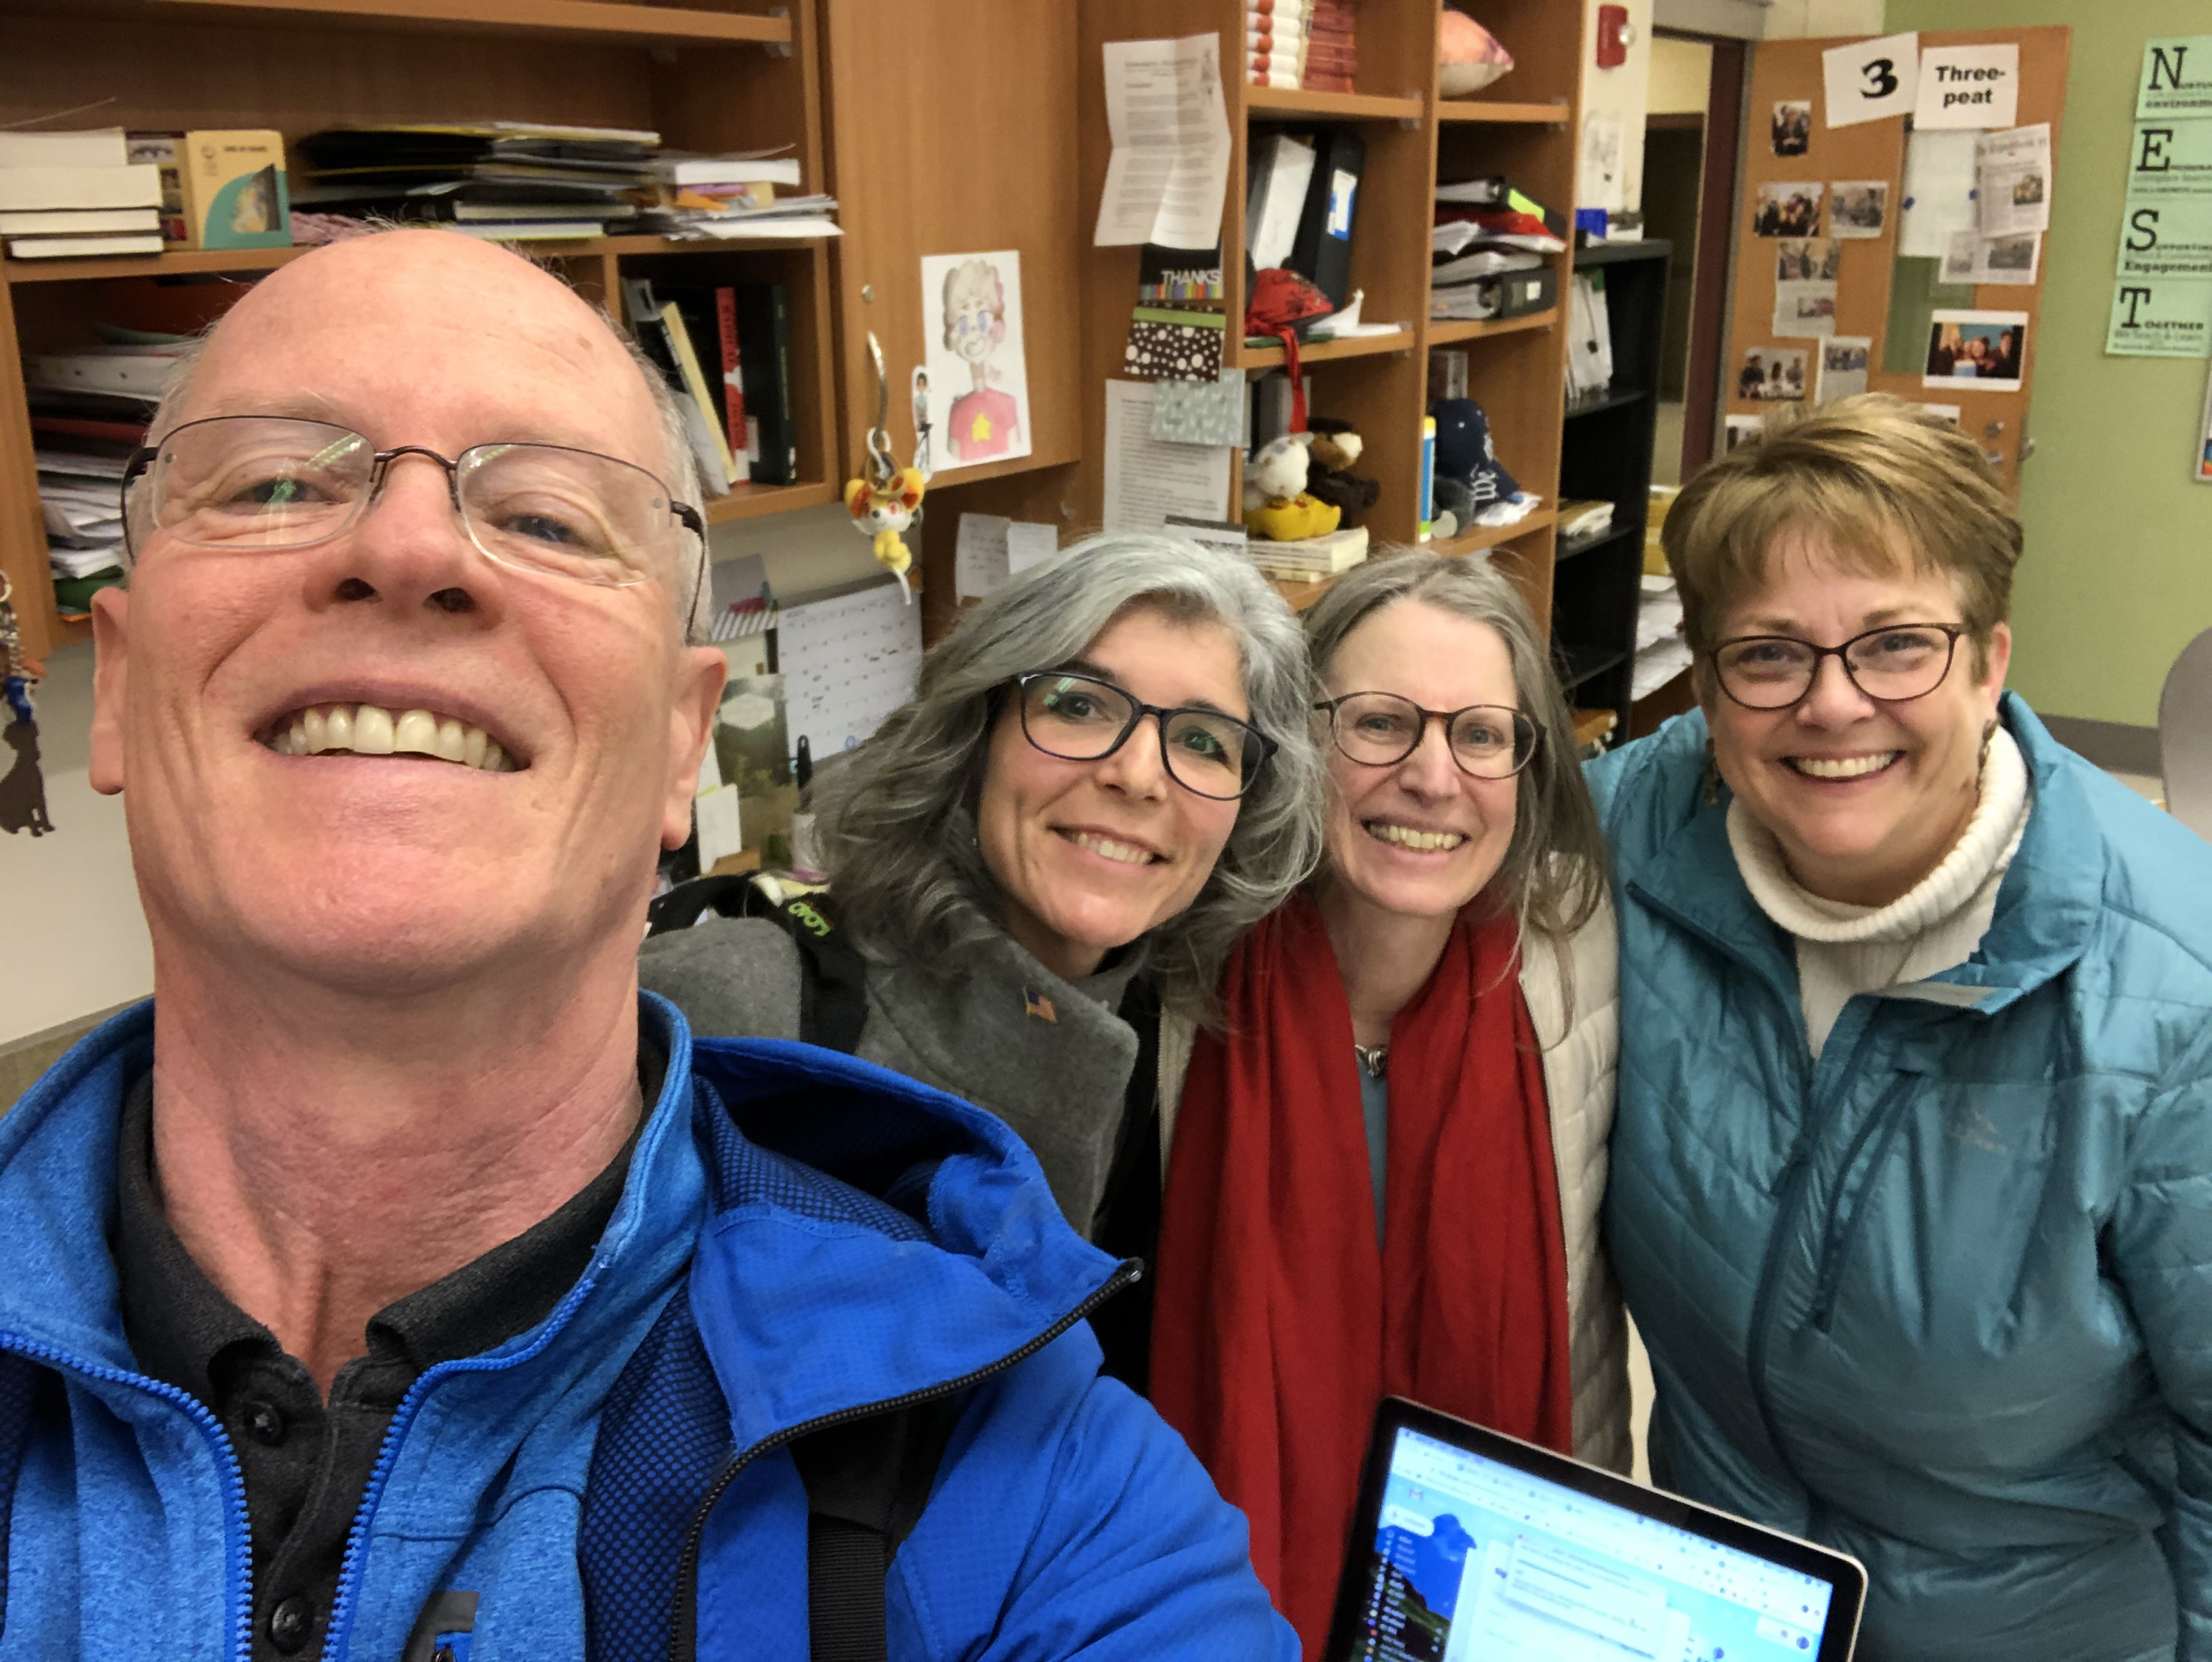 Selfie-style photo of Rich Cairn, Kelley Brown, Alison Noyes, and Laurie Risler